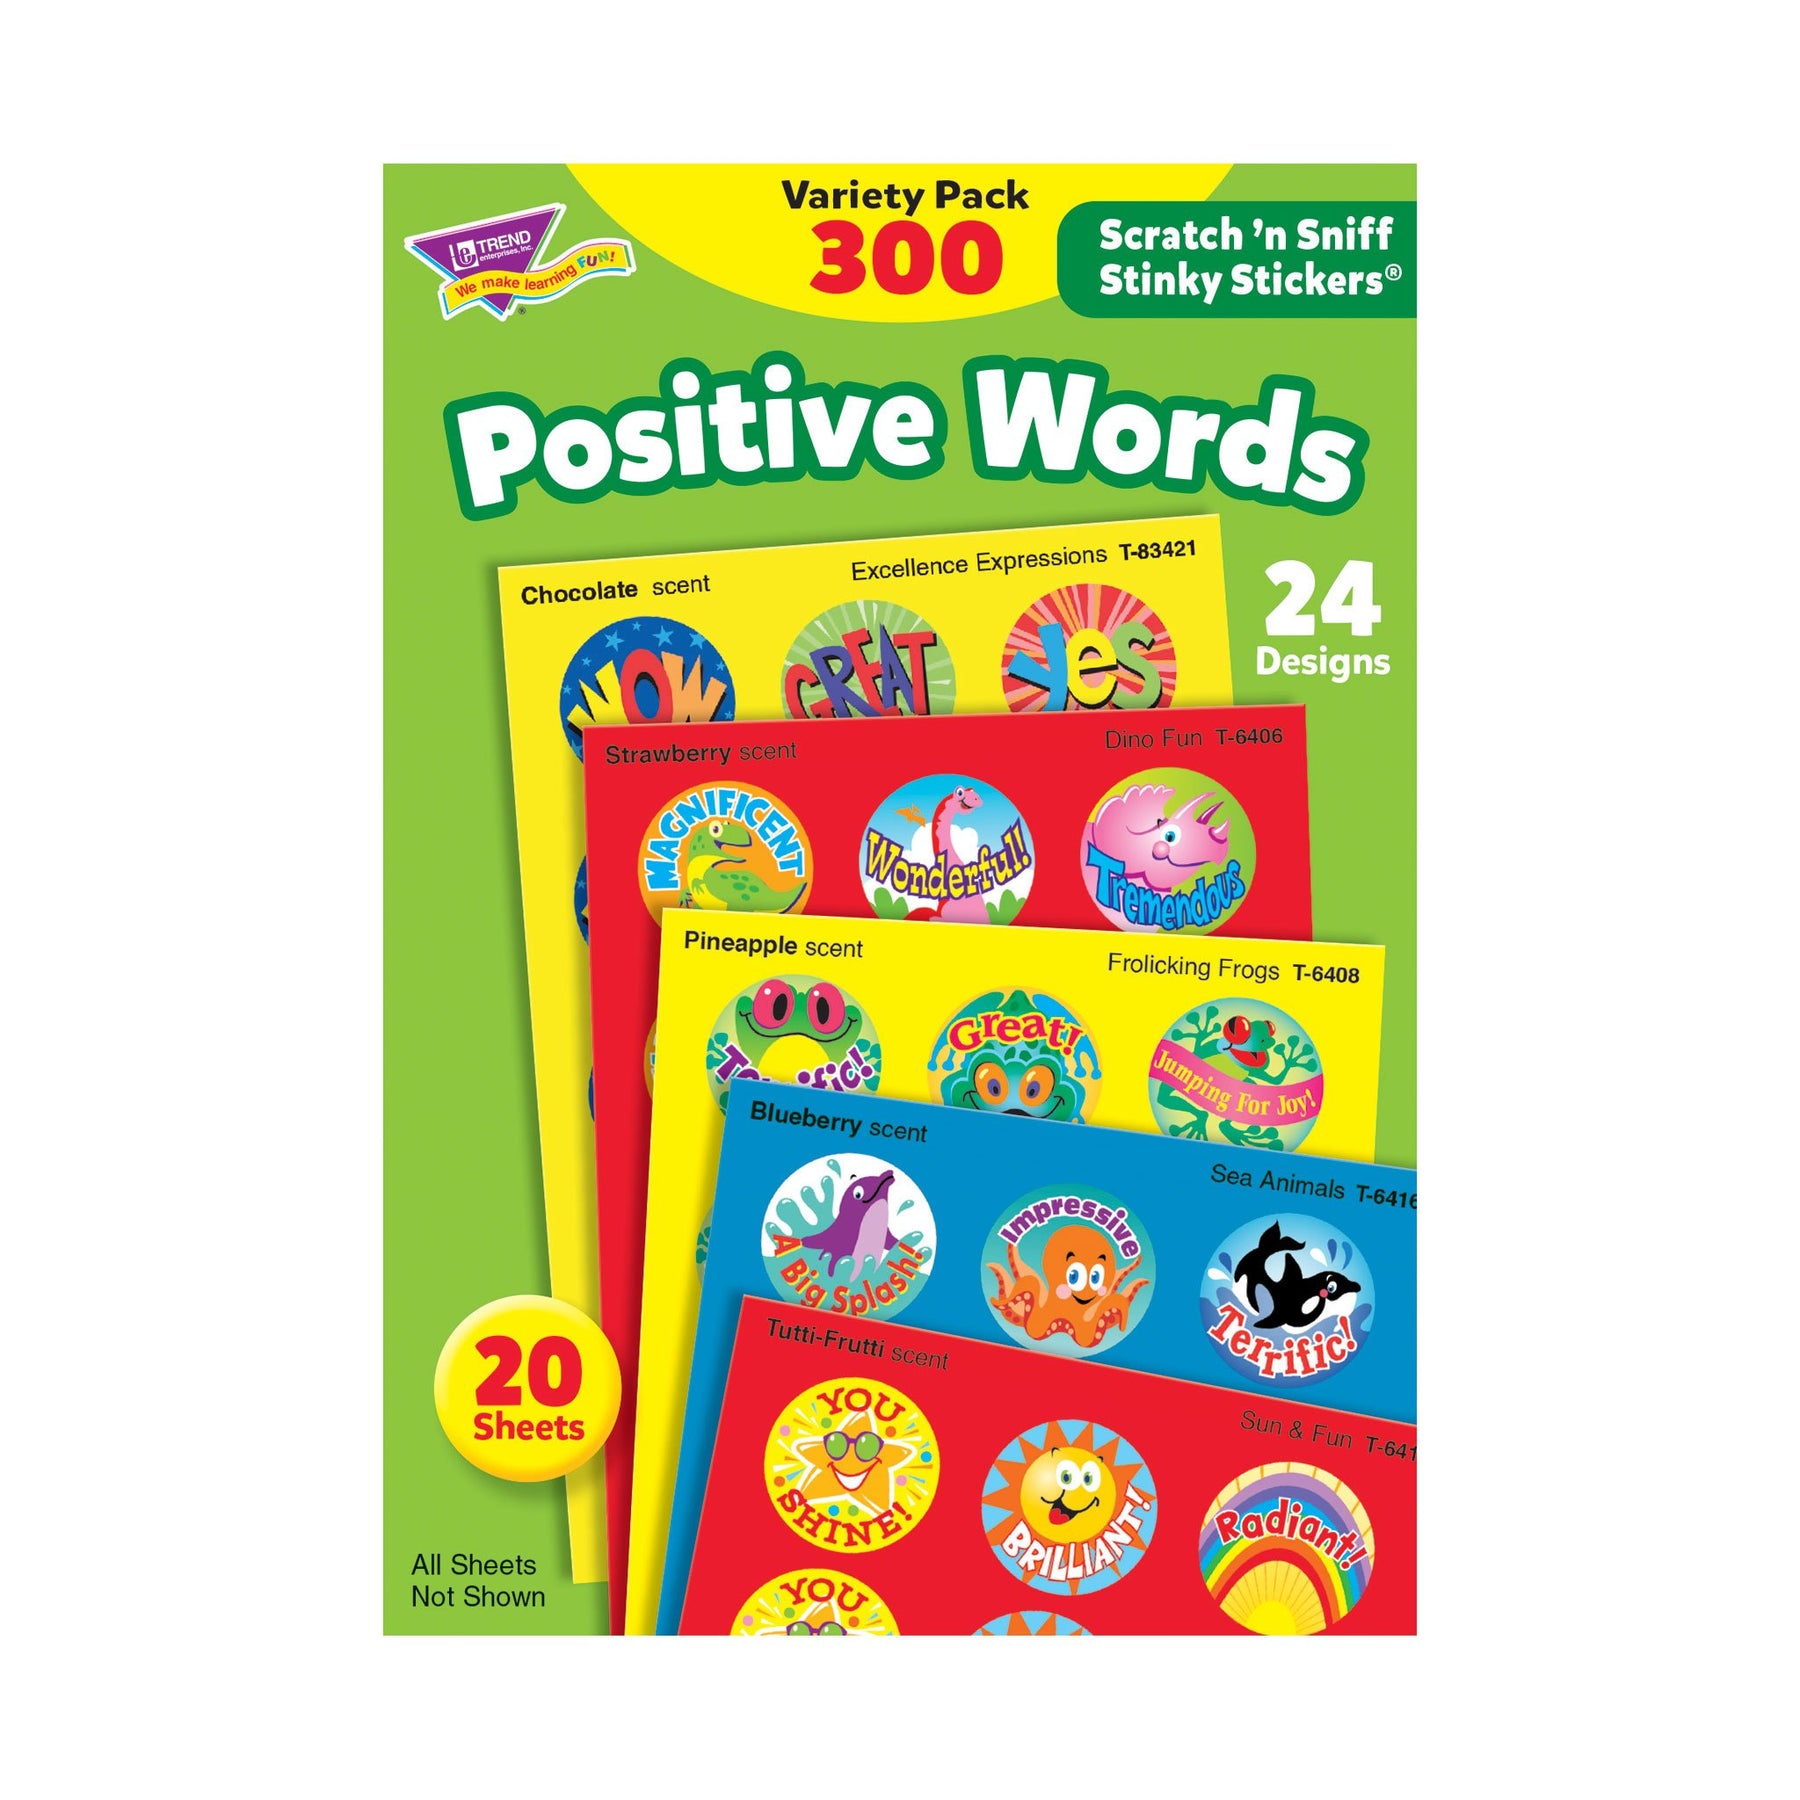 Foil Star Mini Stickers - Value Pack at Lakeshore Learning